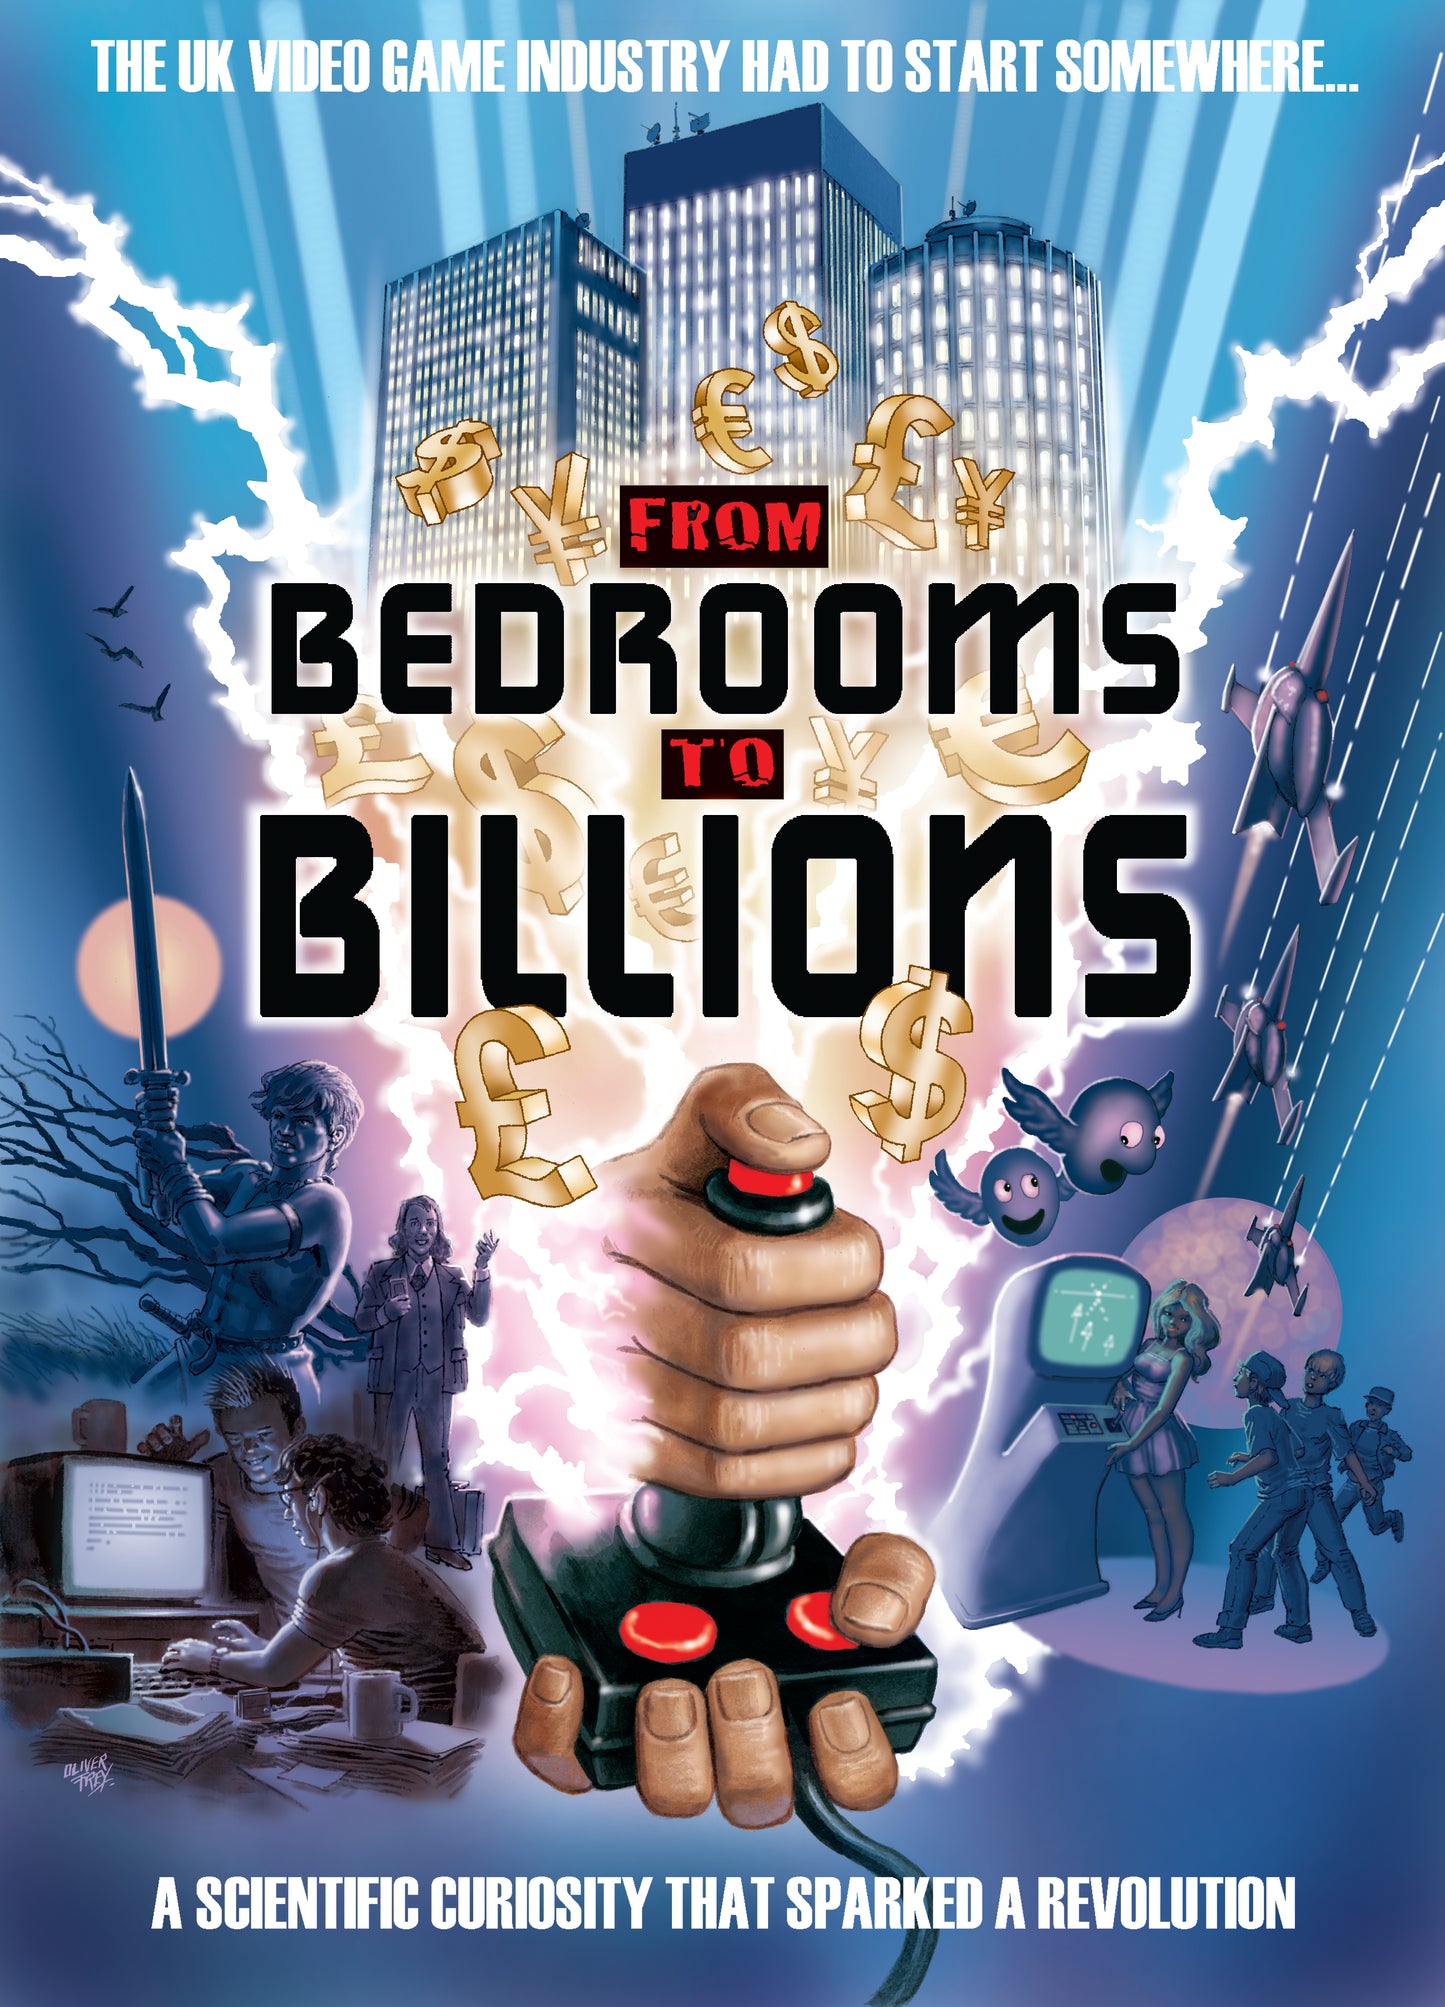 From Bedrooms to Billions A2 film poster designed by Oliver Frey